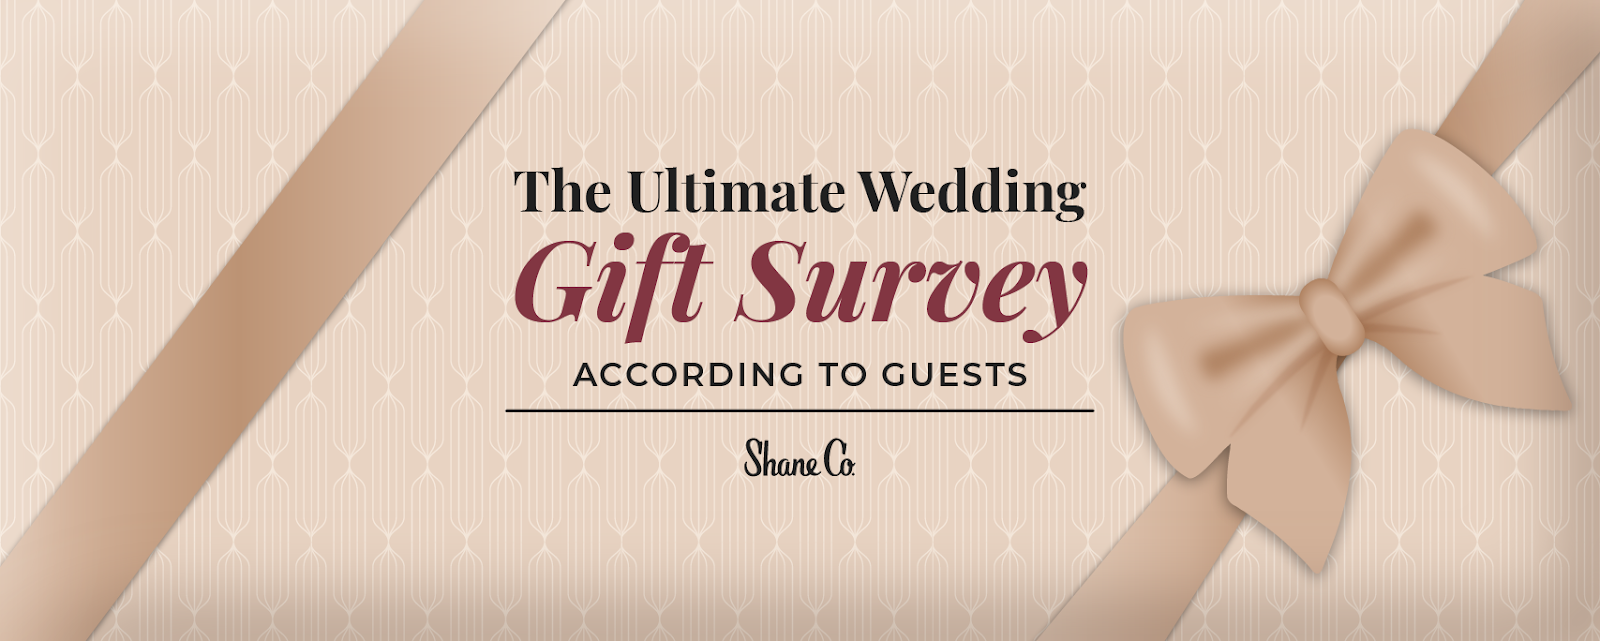 The Ultimate Wedding Gift Survey, According to Guests